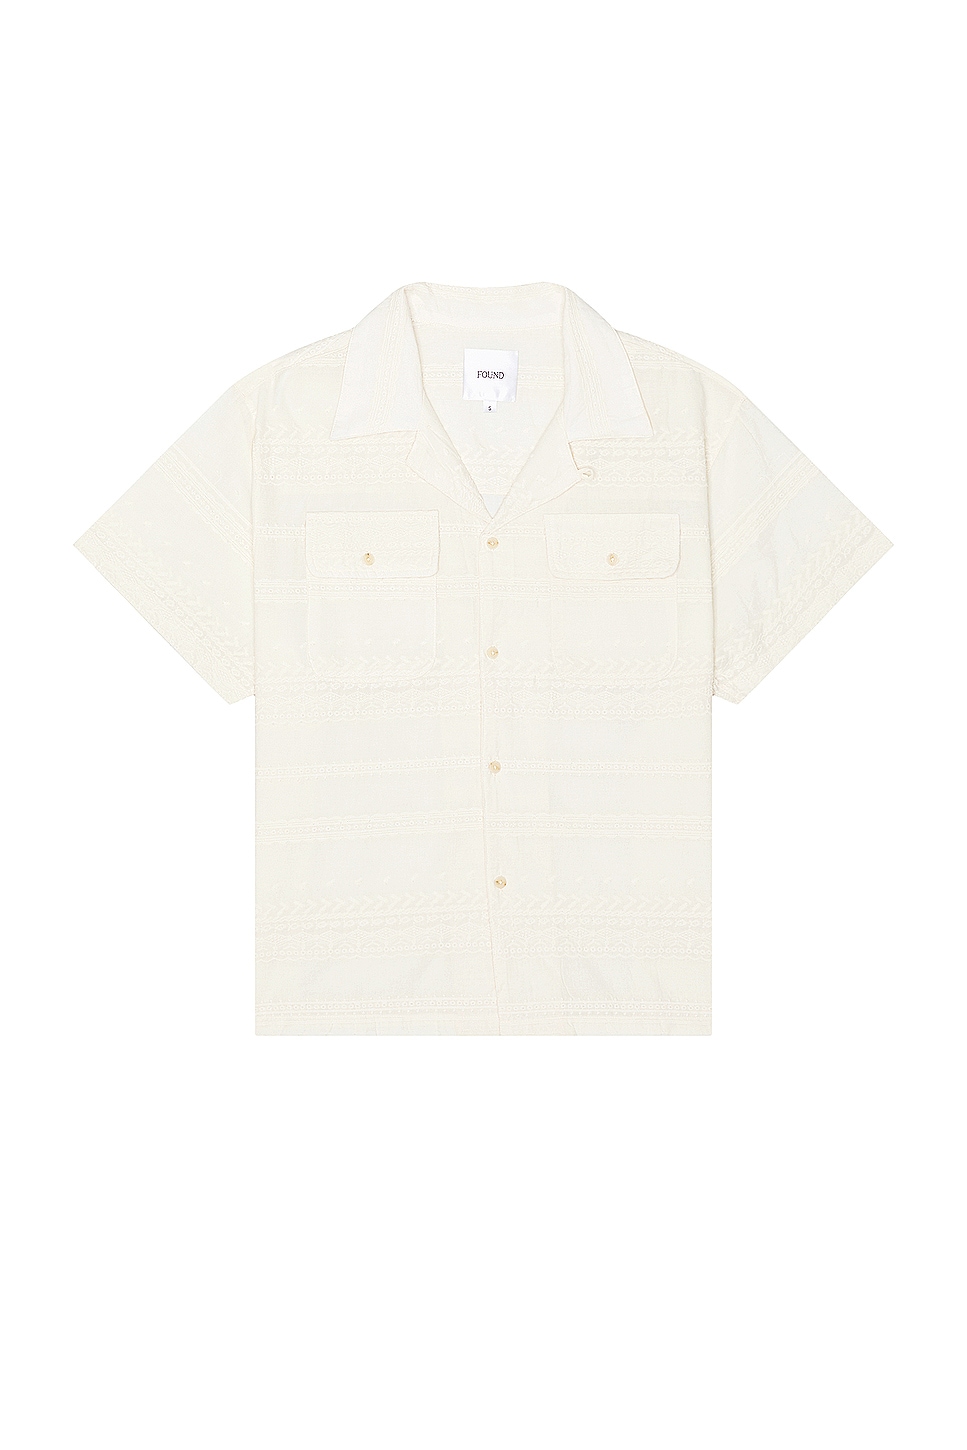 Lace Short Sleeve Camp Shirt in White